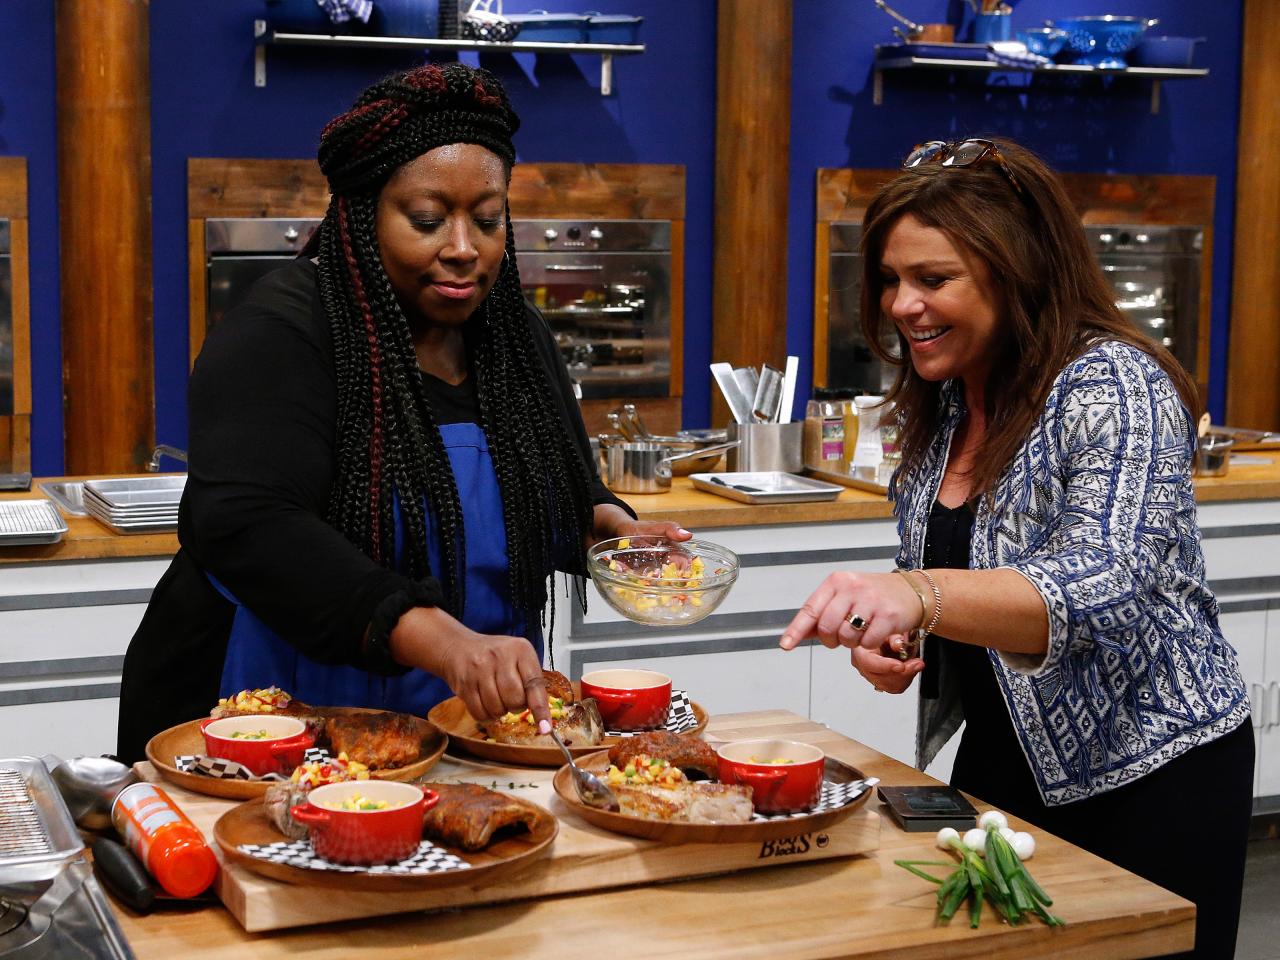 Mentor Rachael Ray watches over Loni Love of the blue team as she cooks dur...